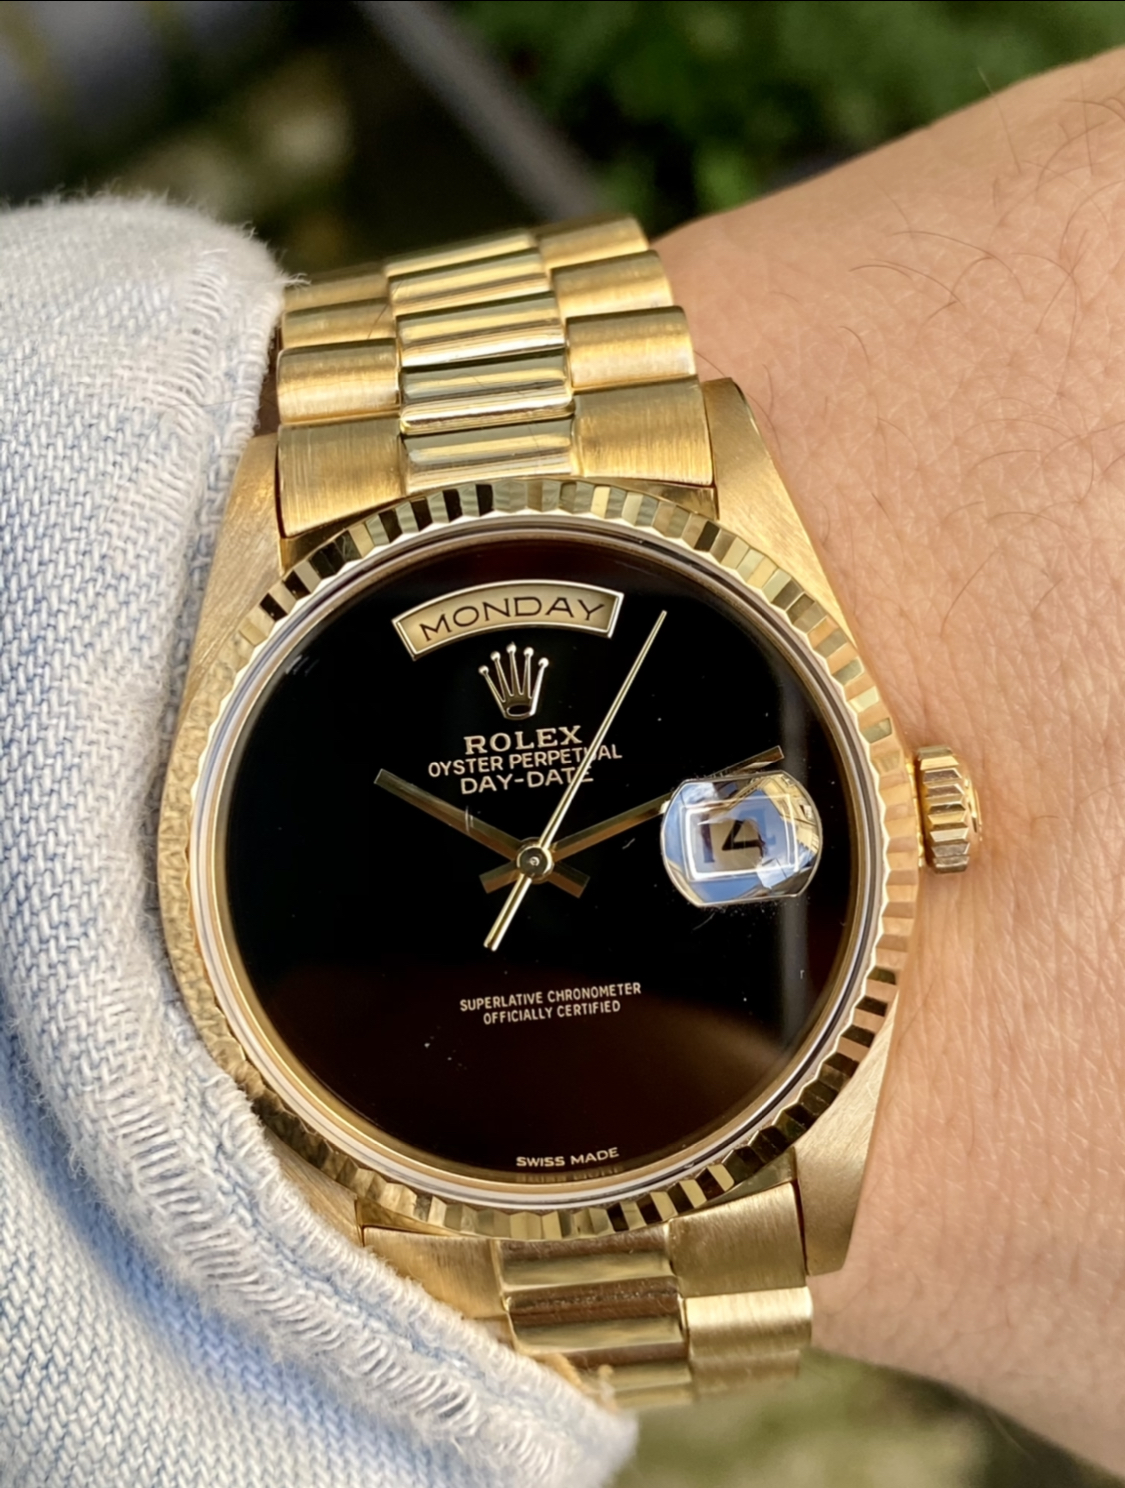 Rolex Day-Date Onyx 18238 With 